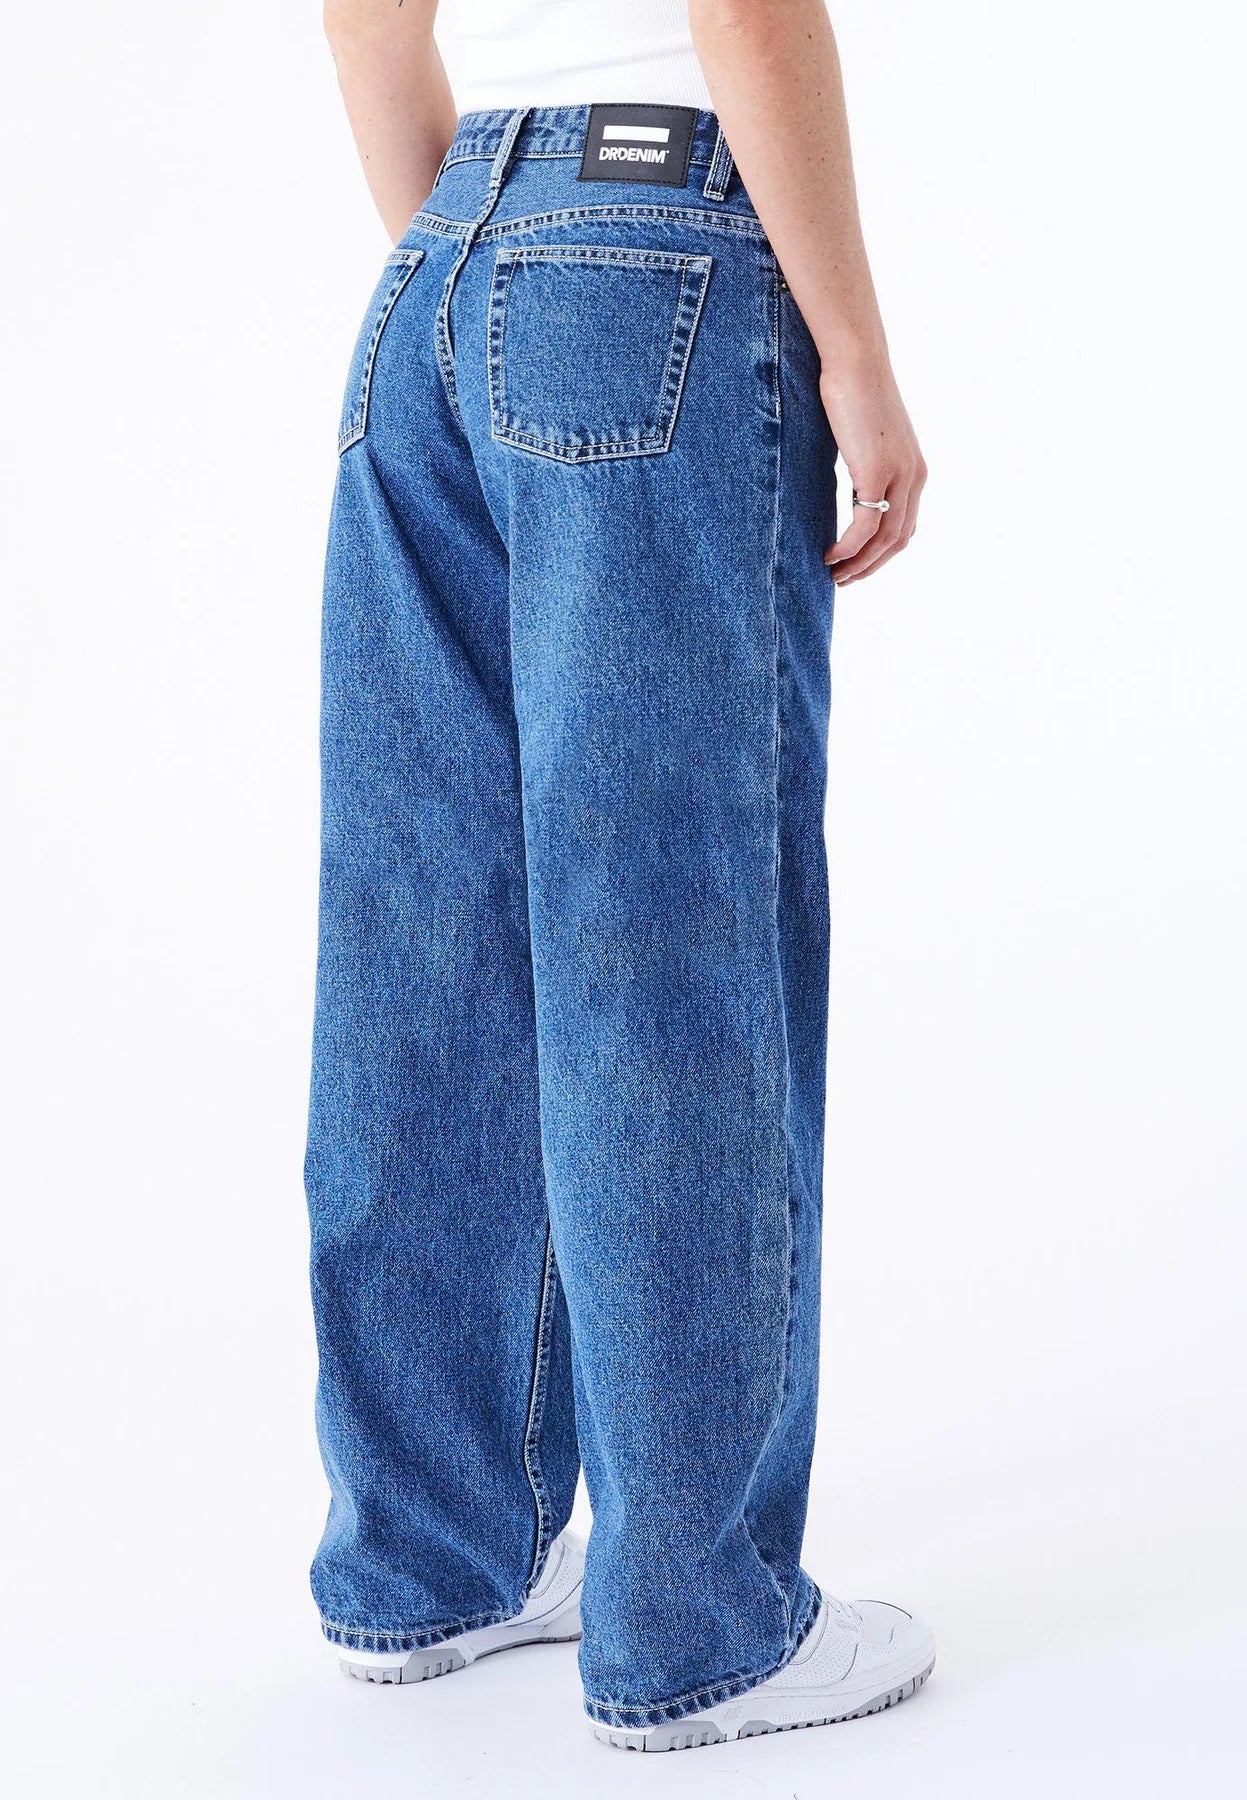 hill jeans